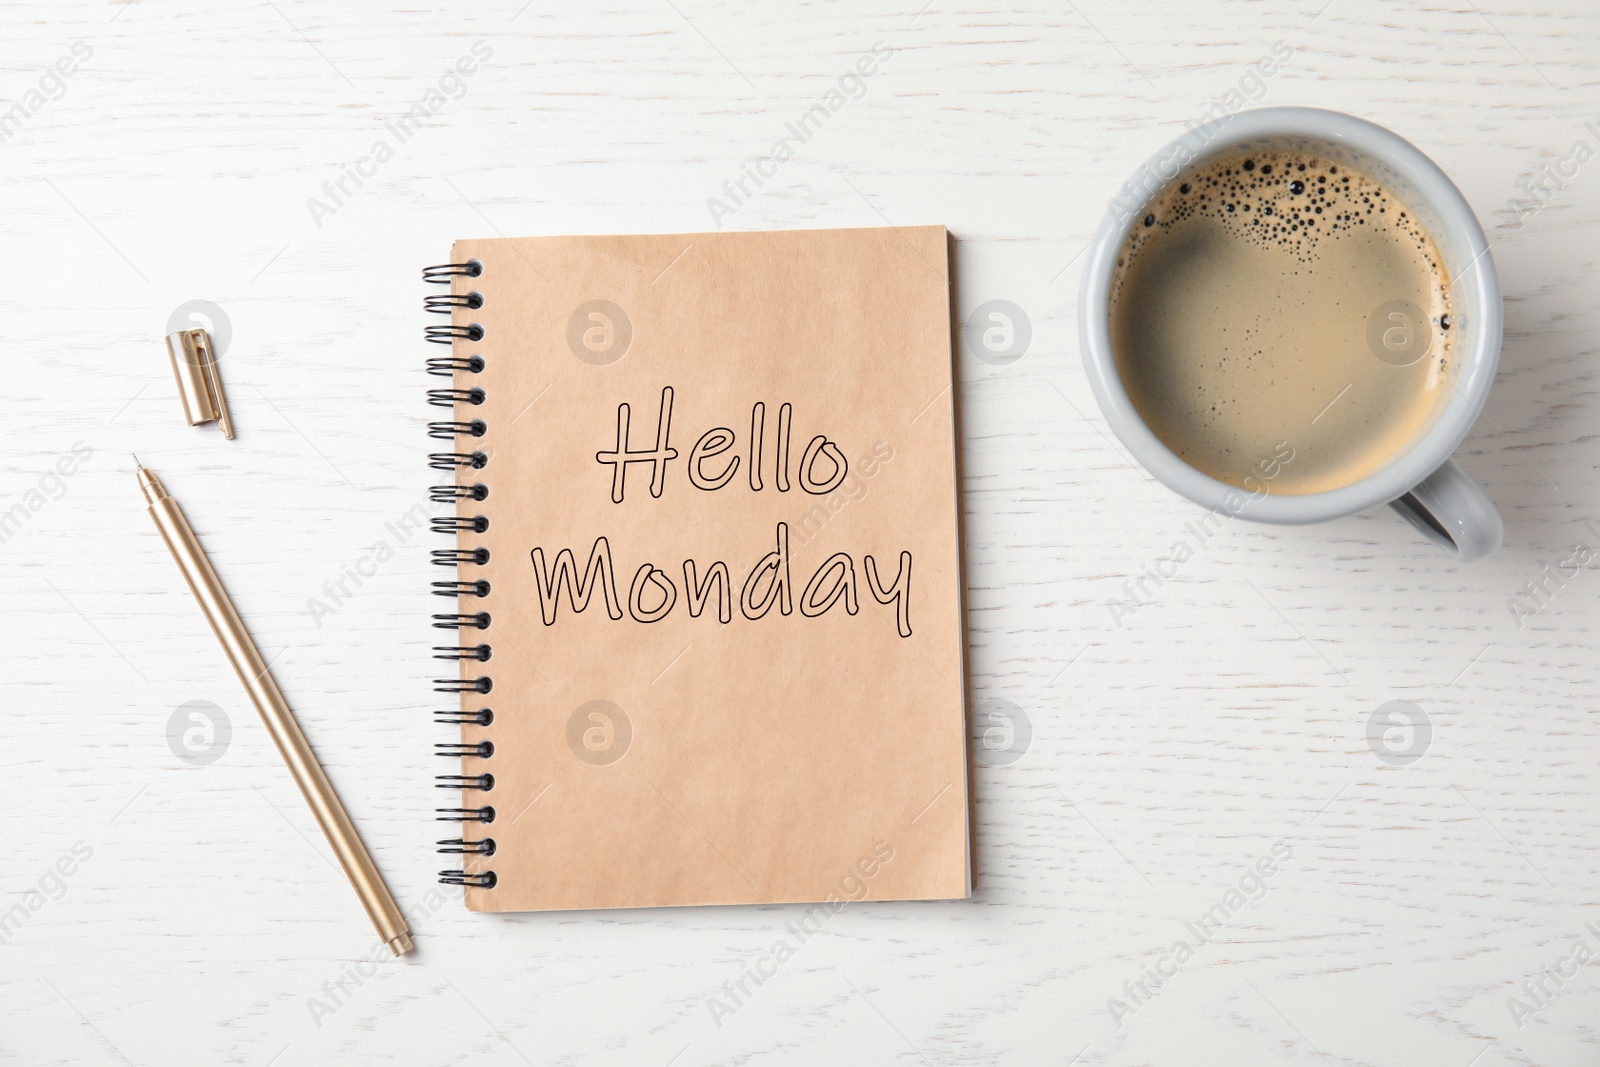 Image of Start your week with good mood. Notebook with text Hello Monday, cup of coffee and pen on white wooden table, flat lay